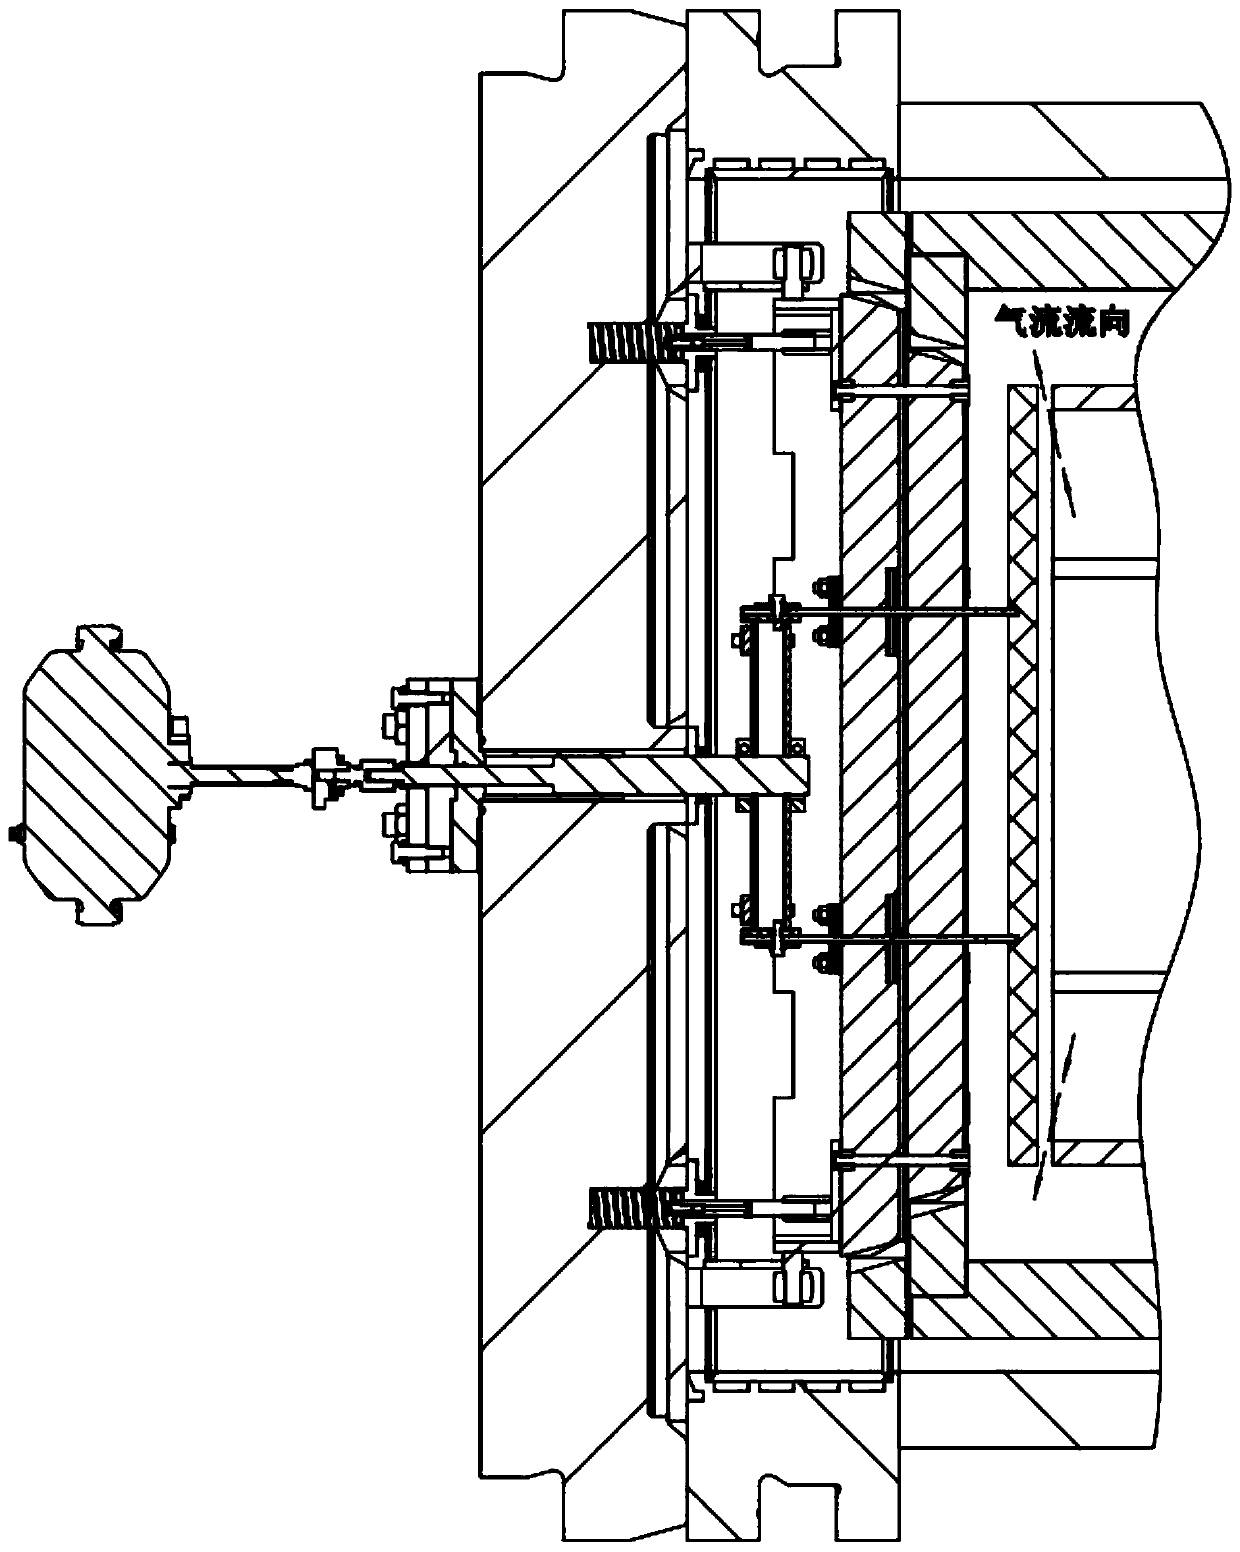 Opening and closing structure of heat preservation door in sintering furnace